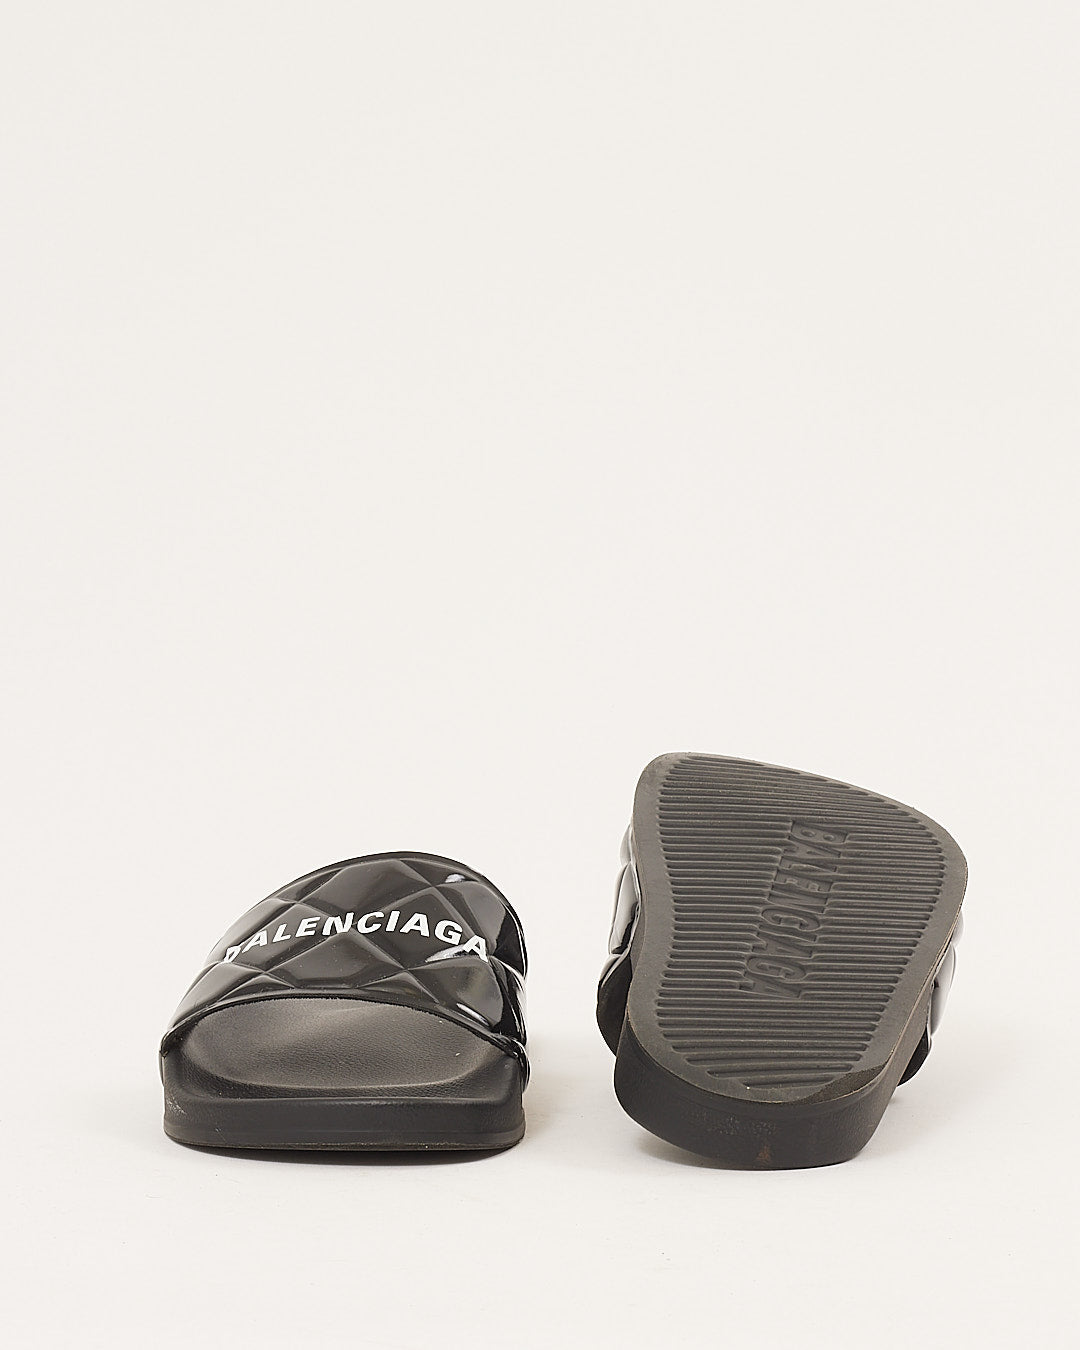 Balenciaga Patent Leather Quilted Logo Pool Slides - 40